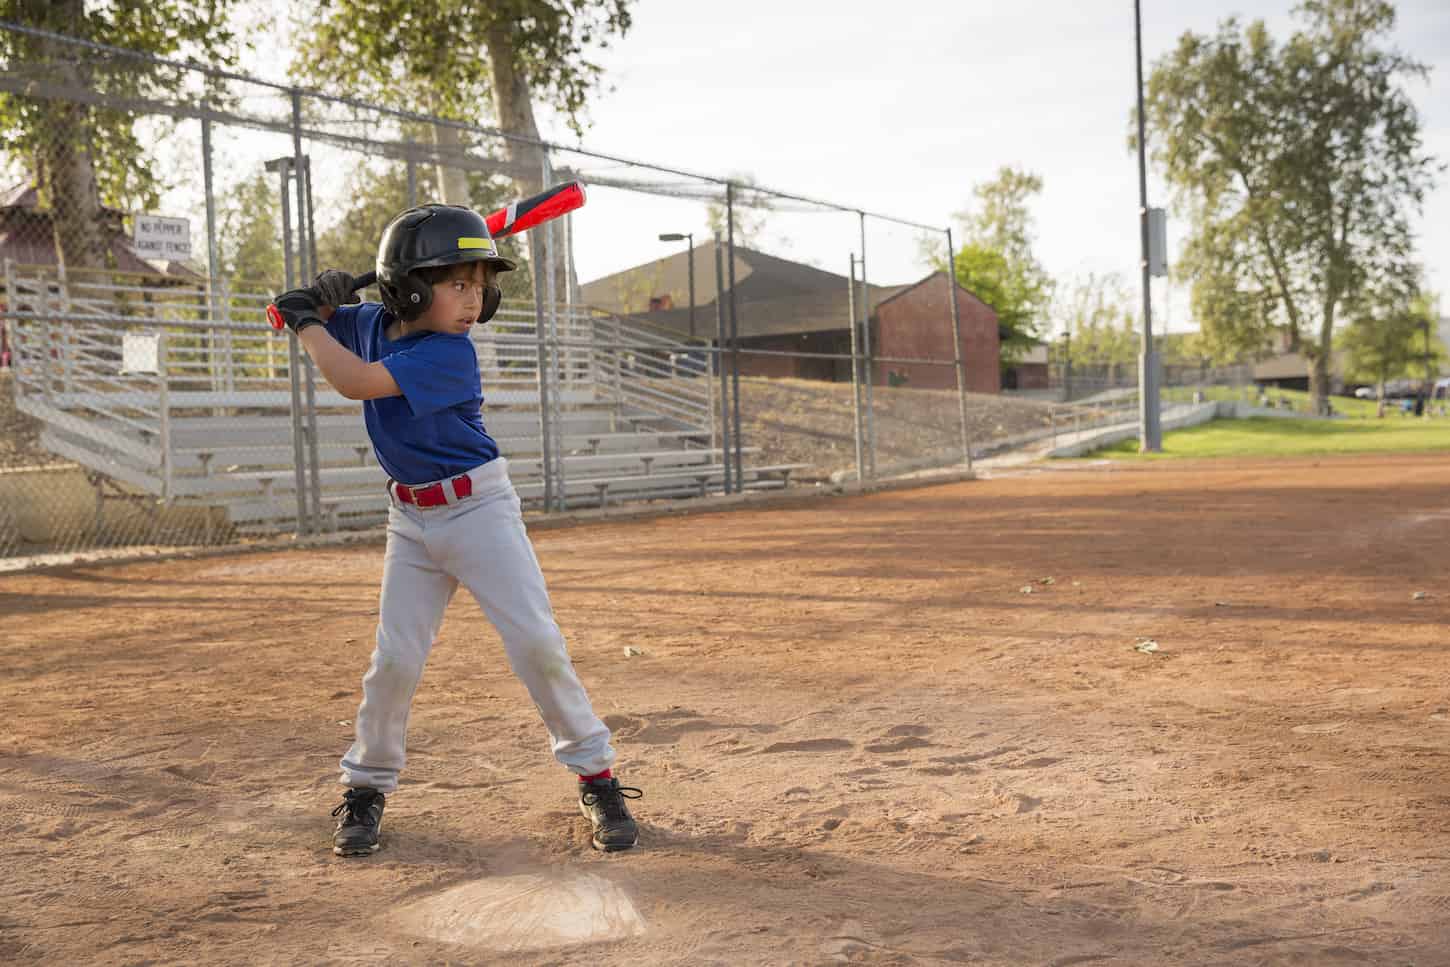 An image of a Boy batting at practice on the baseball field.